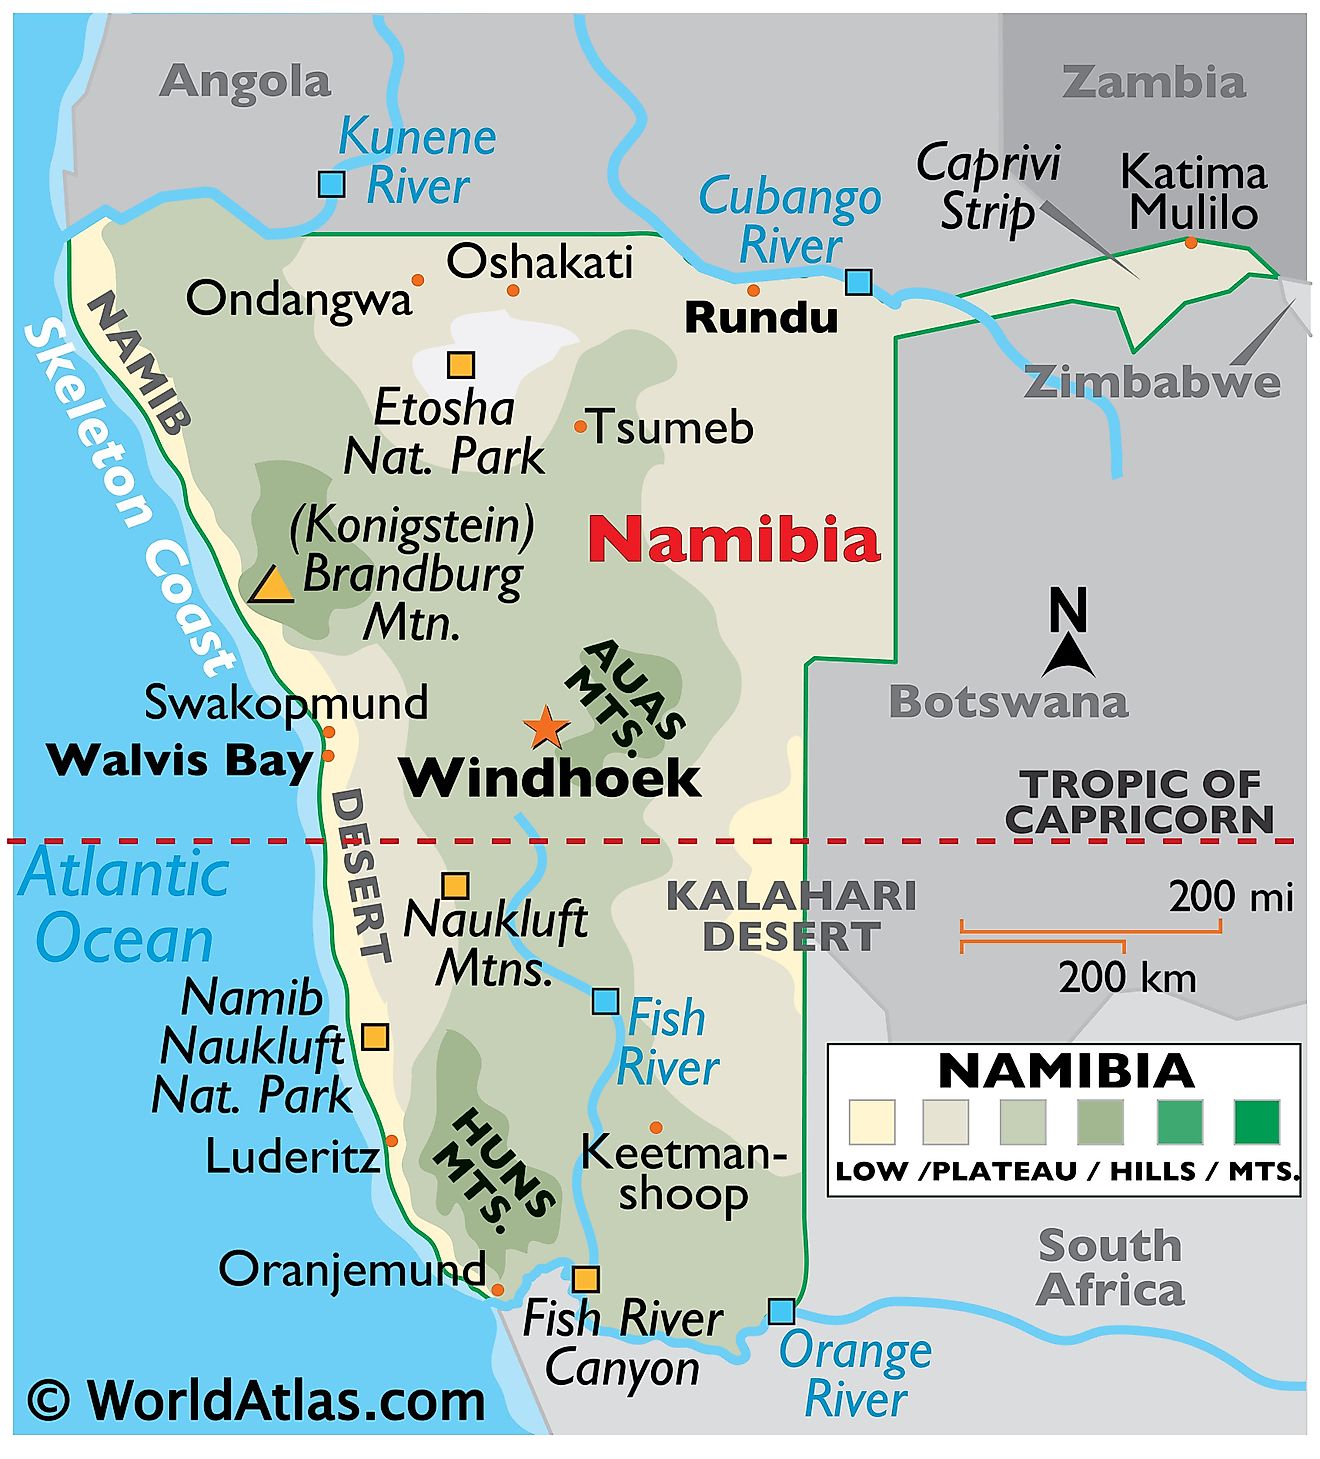 Physical Map of Namibia showing the relief of the country and major physical features like deserts, mountains, rivers, relative location of major cities, and more.